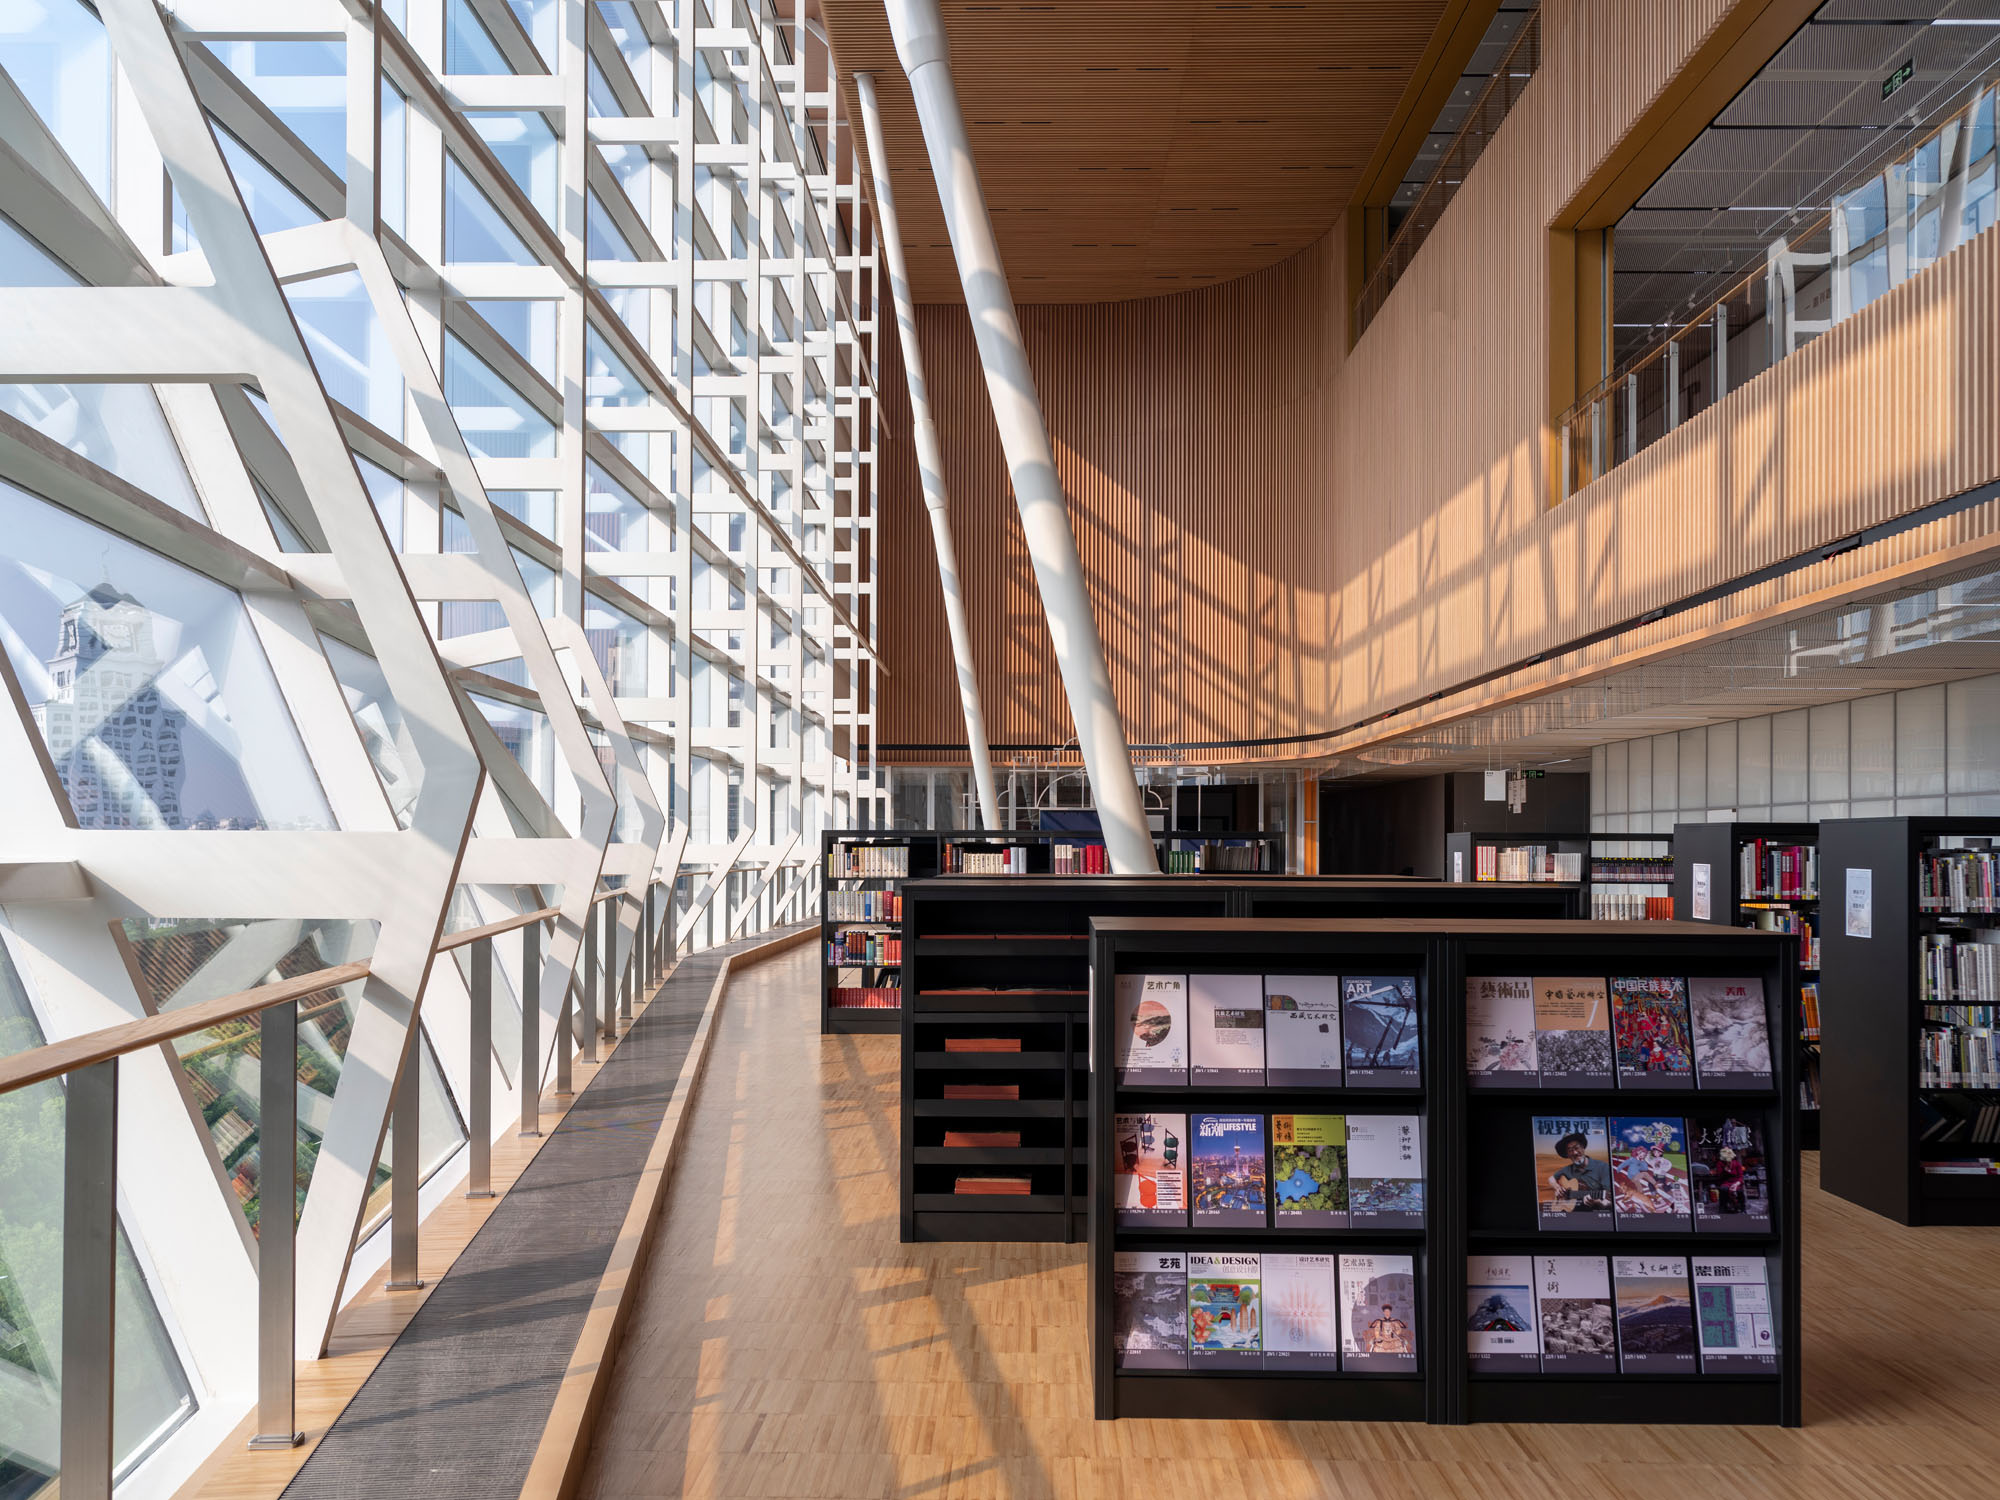 A photograph of the interior of the Shanghai East Library where there are books on shelves